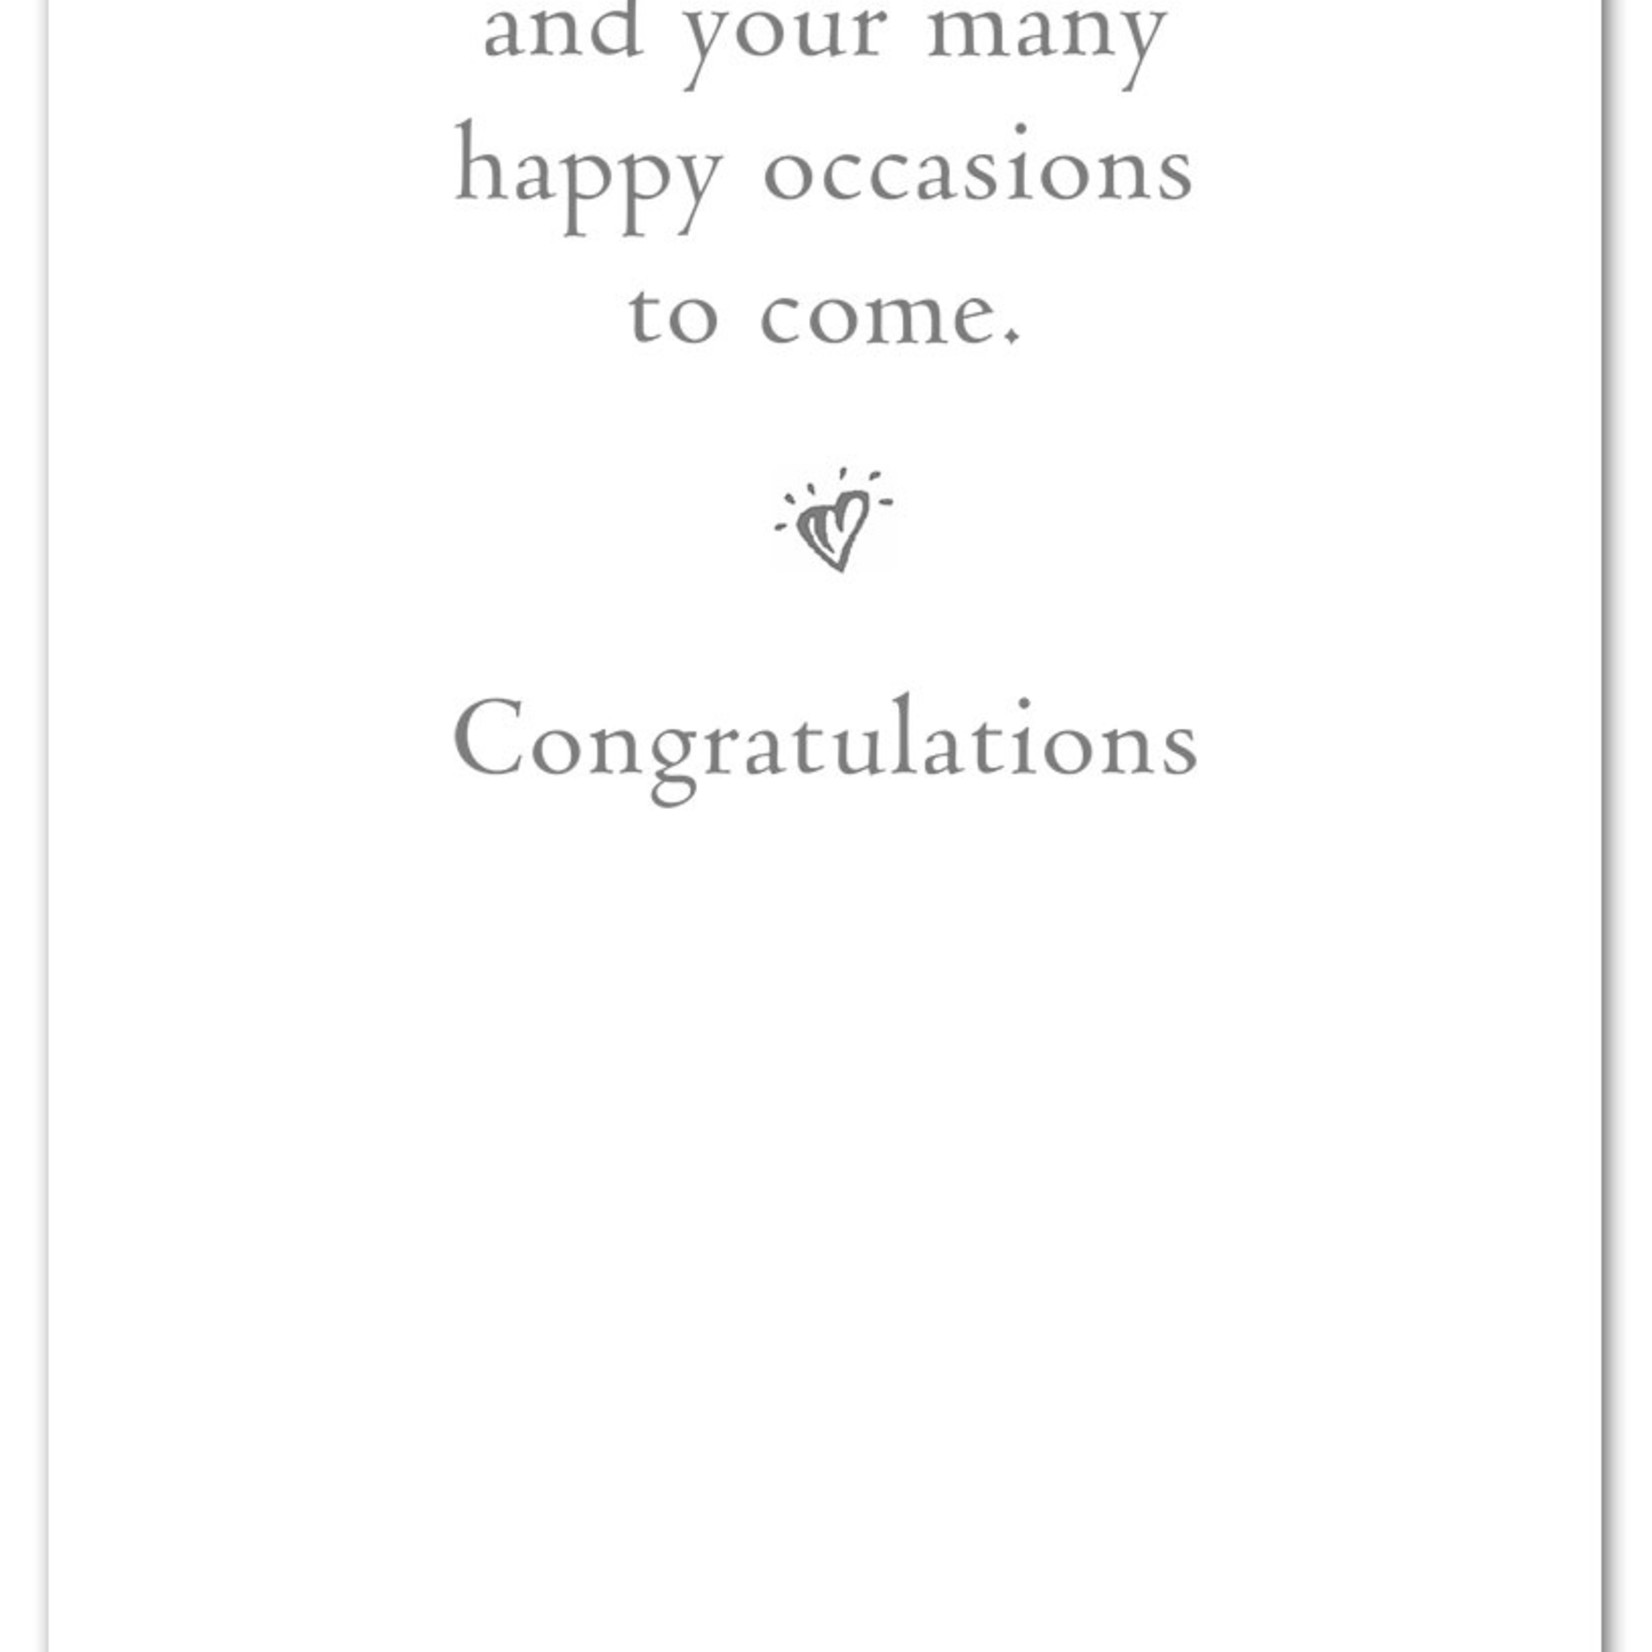 Cardthartic Cardthartic - Champagne & Lavender Wedding Card